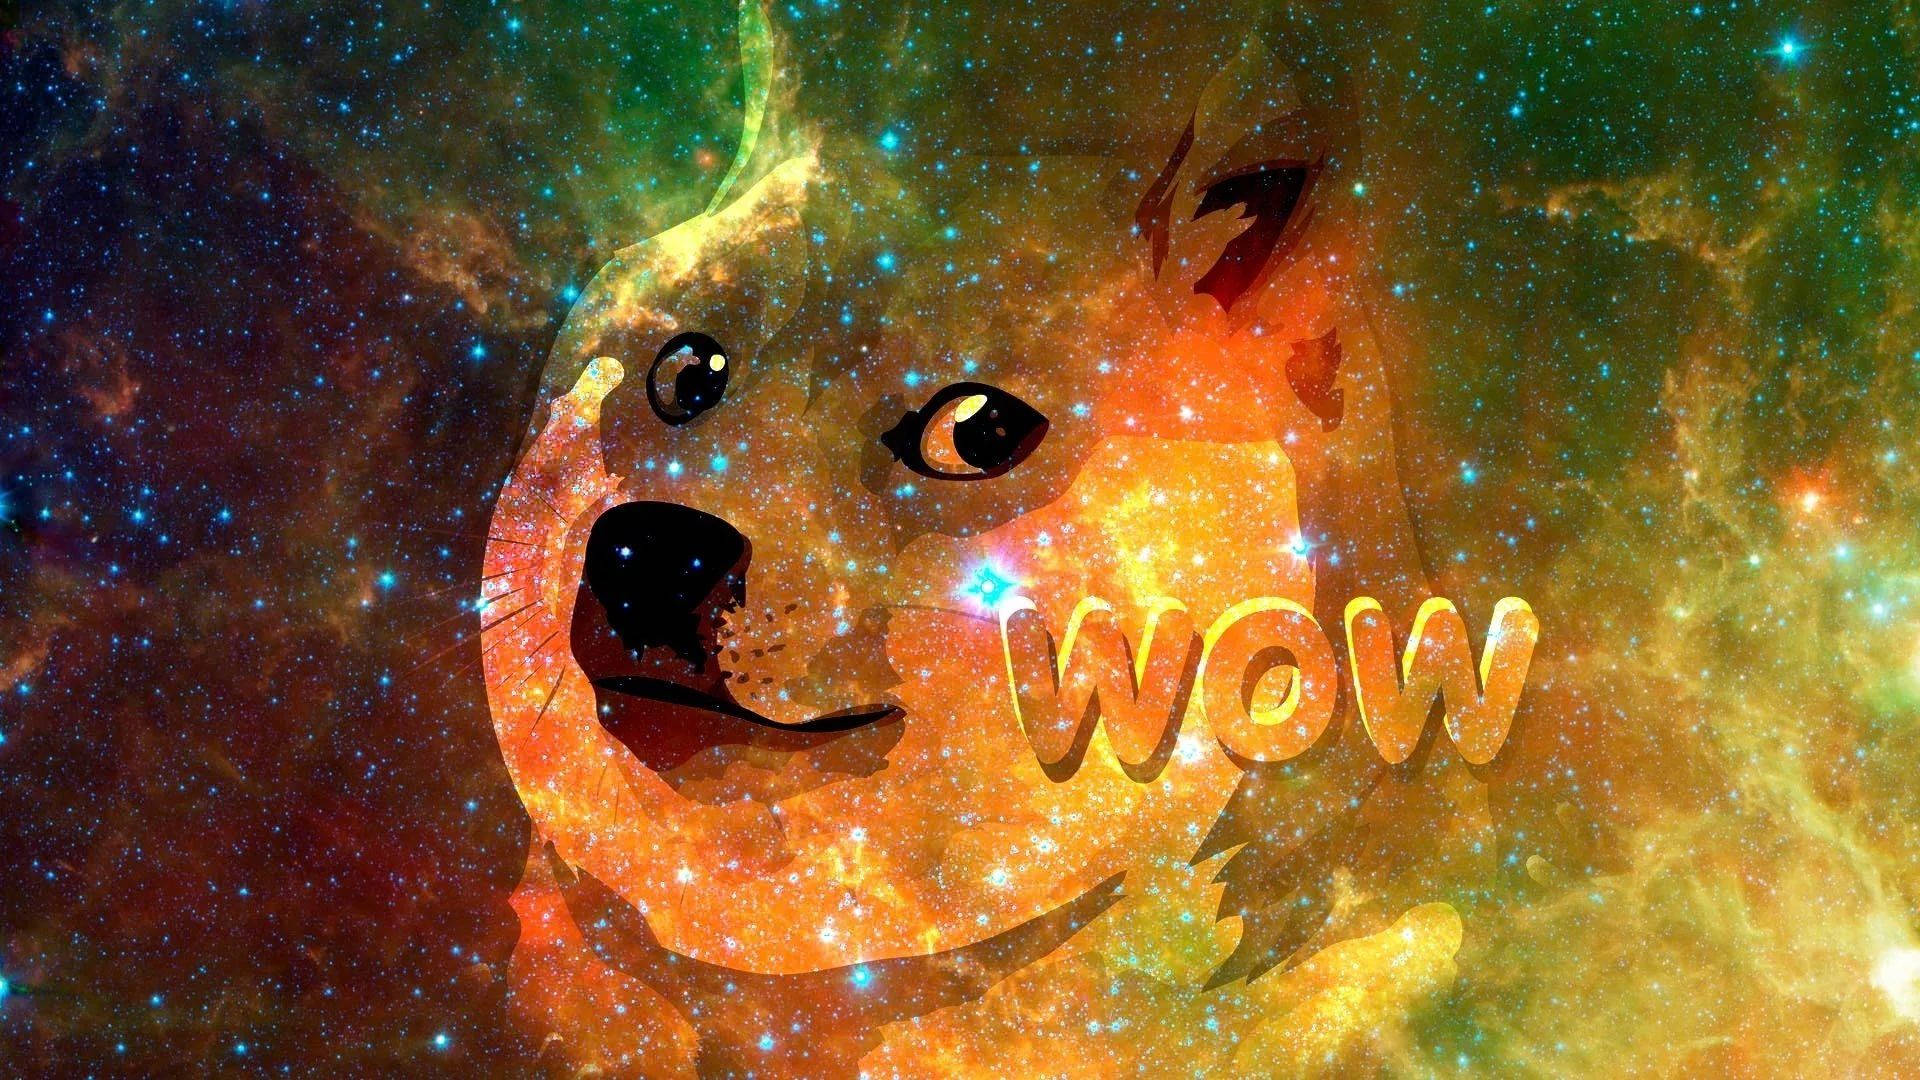 Doge meme on an orange starry background with funny wow expression.